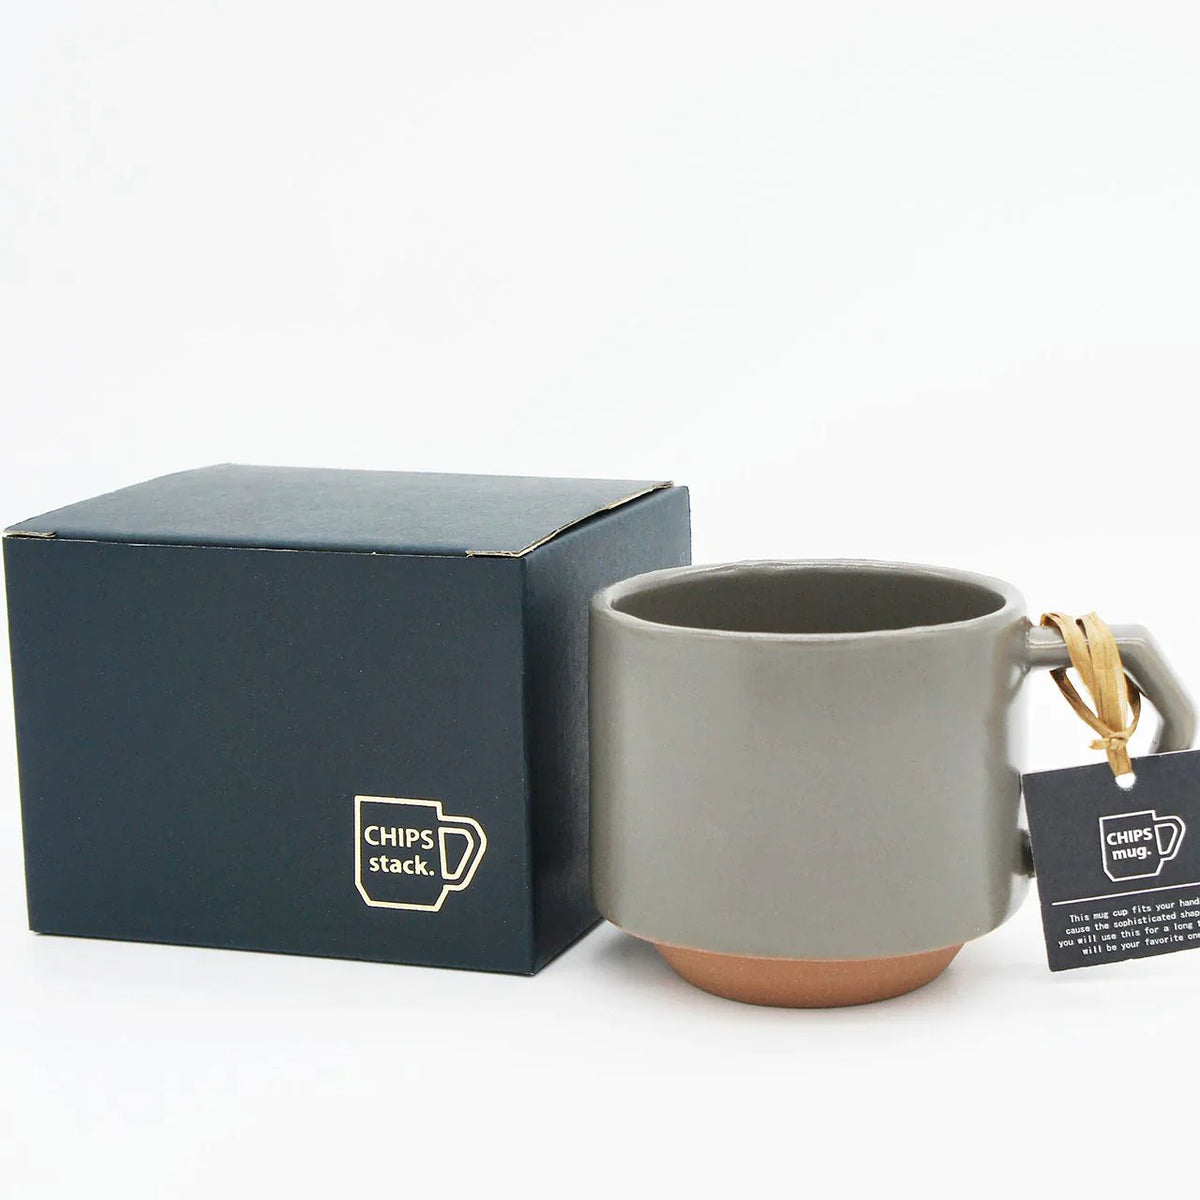 A Stacking Mug - Khaki with a tag in front of a stackable box.